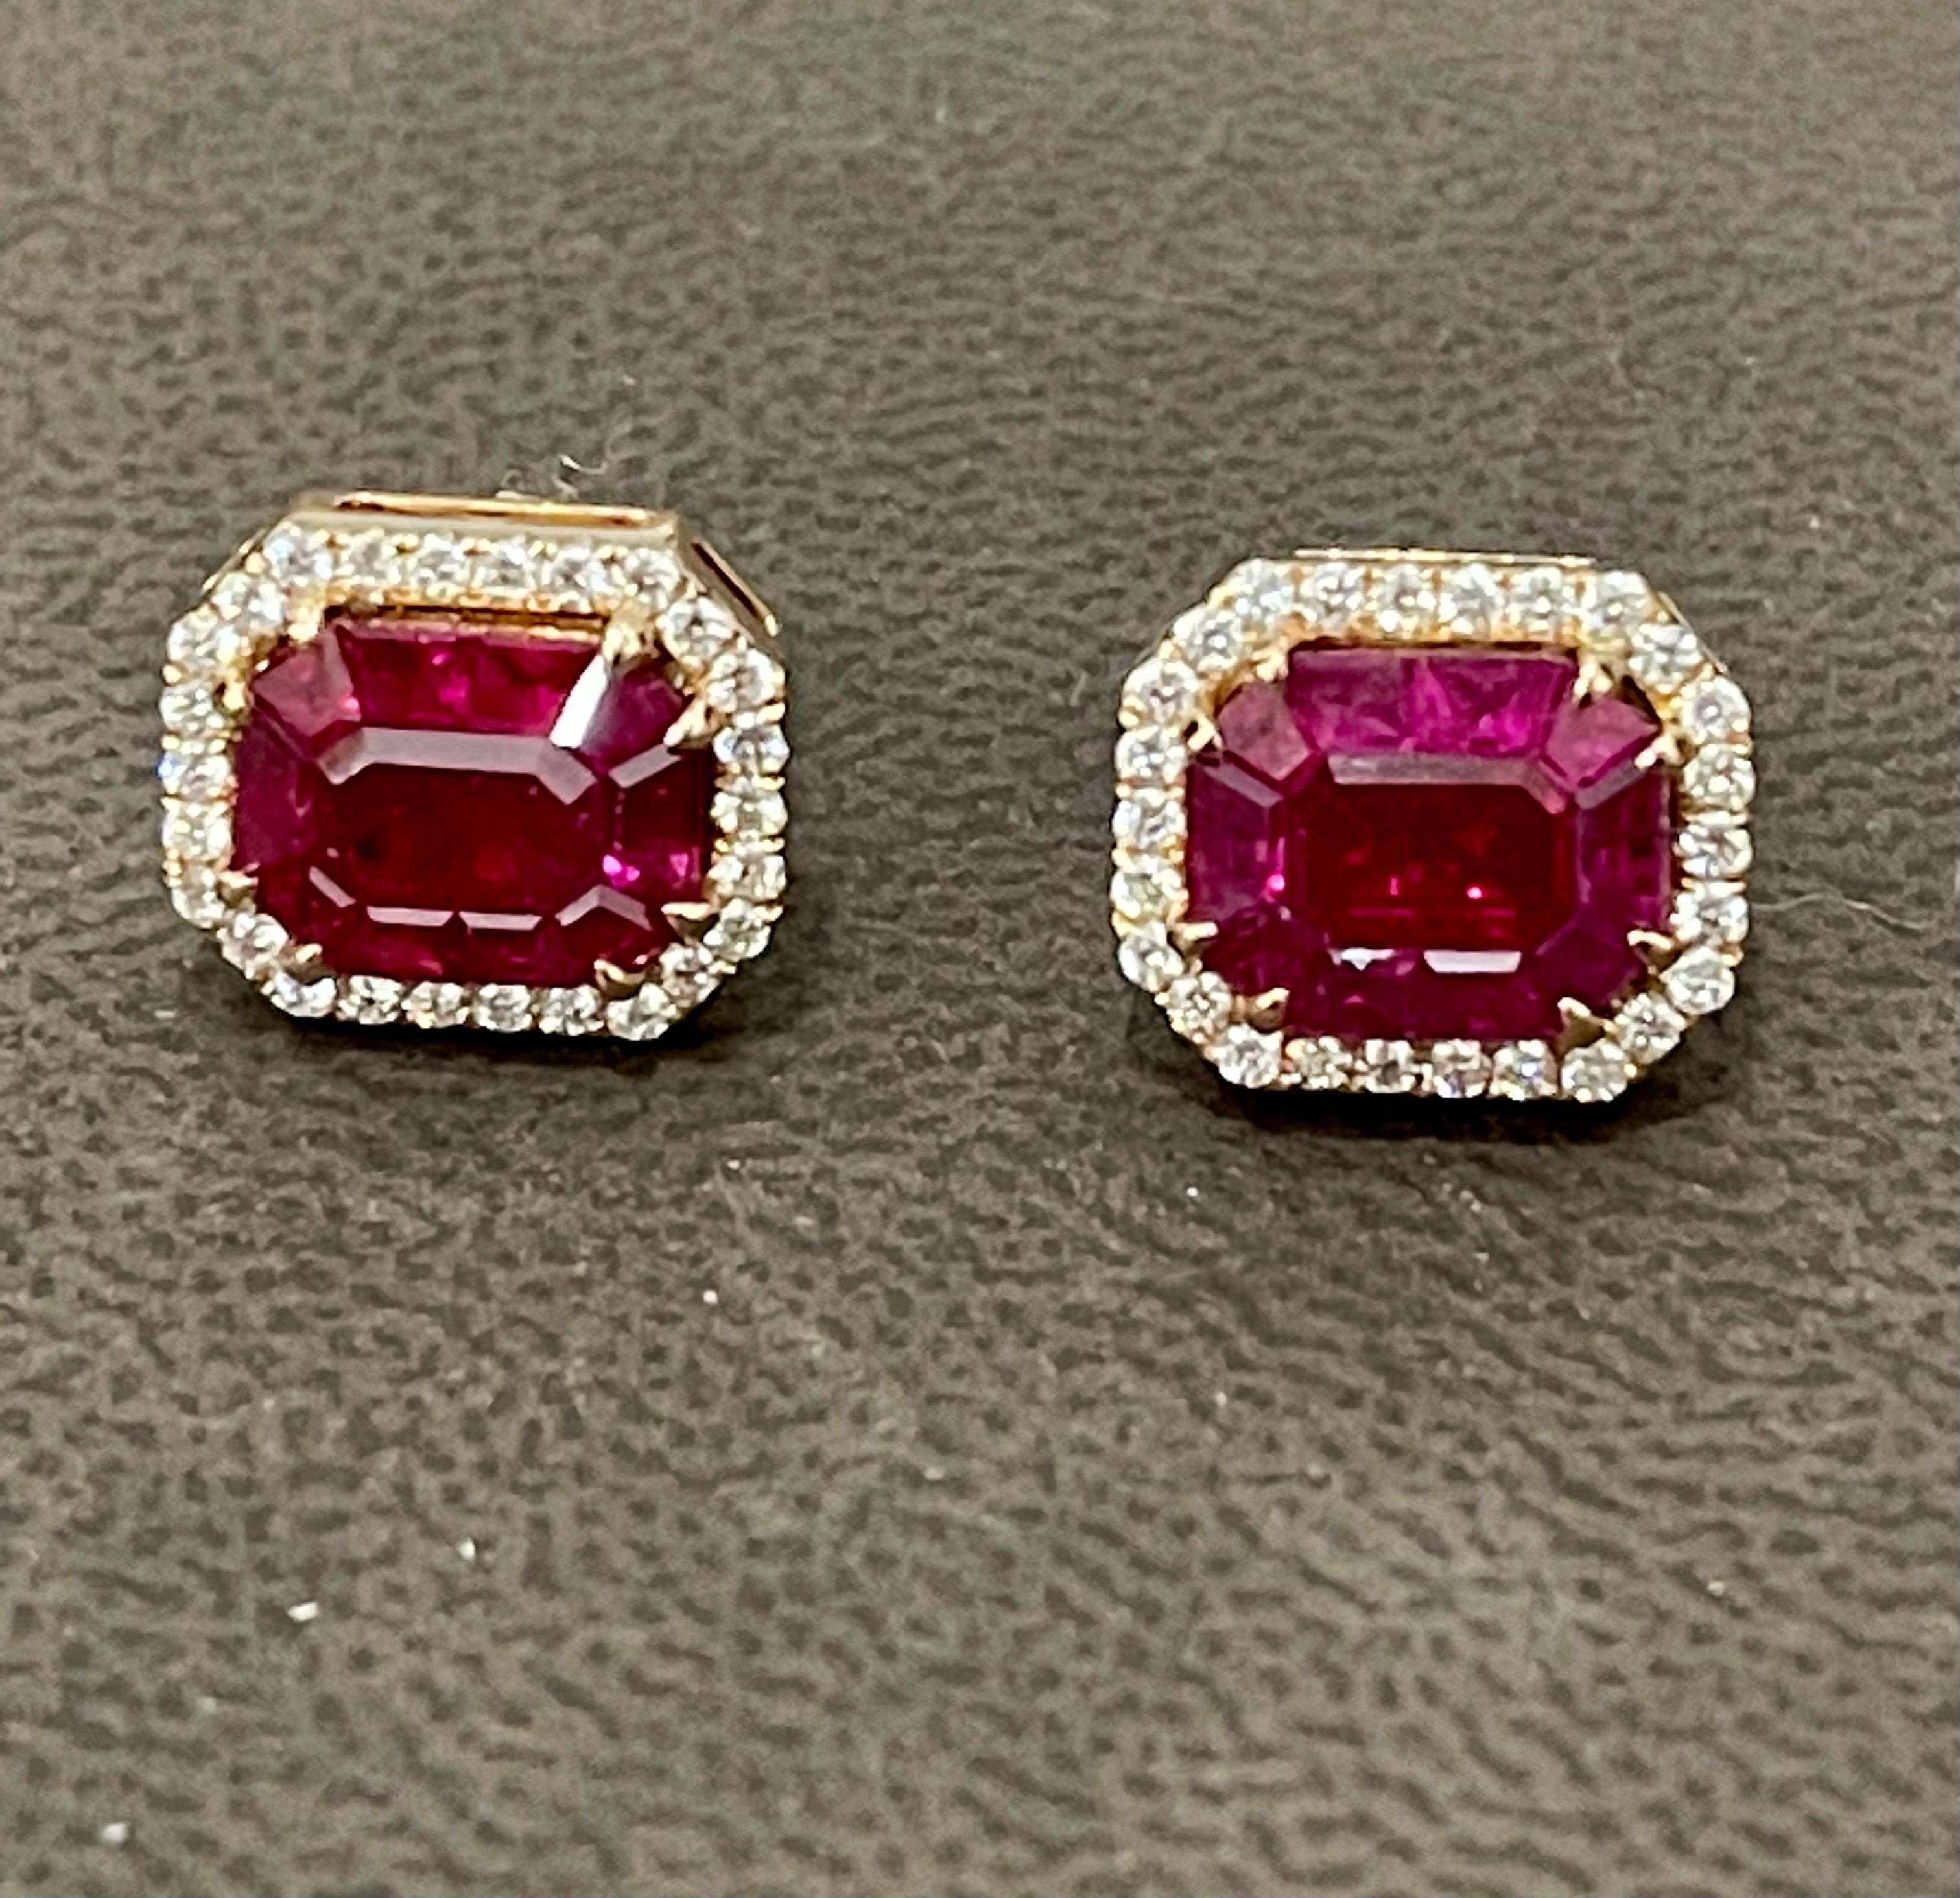 6.5 Carat Natural Burma Ruby and Diamond Earring in 18 Karat  Yellow Gold
This spectacular  earrings consisting of natural Burma ruby. One Emerald shape ruby 10X8 . It look like a whole one single piece but  in fact there is a center single stone